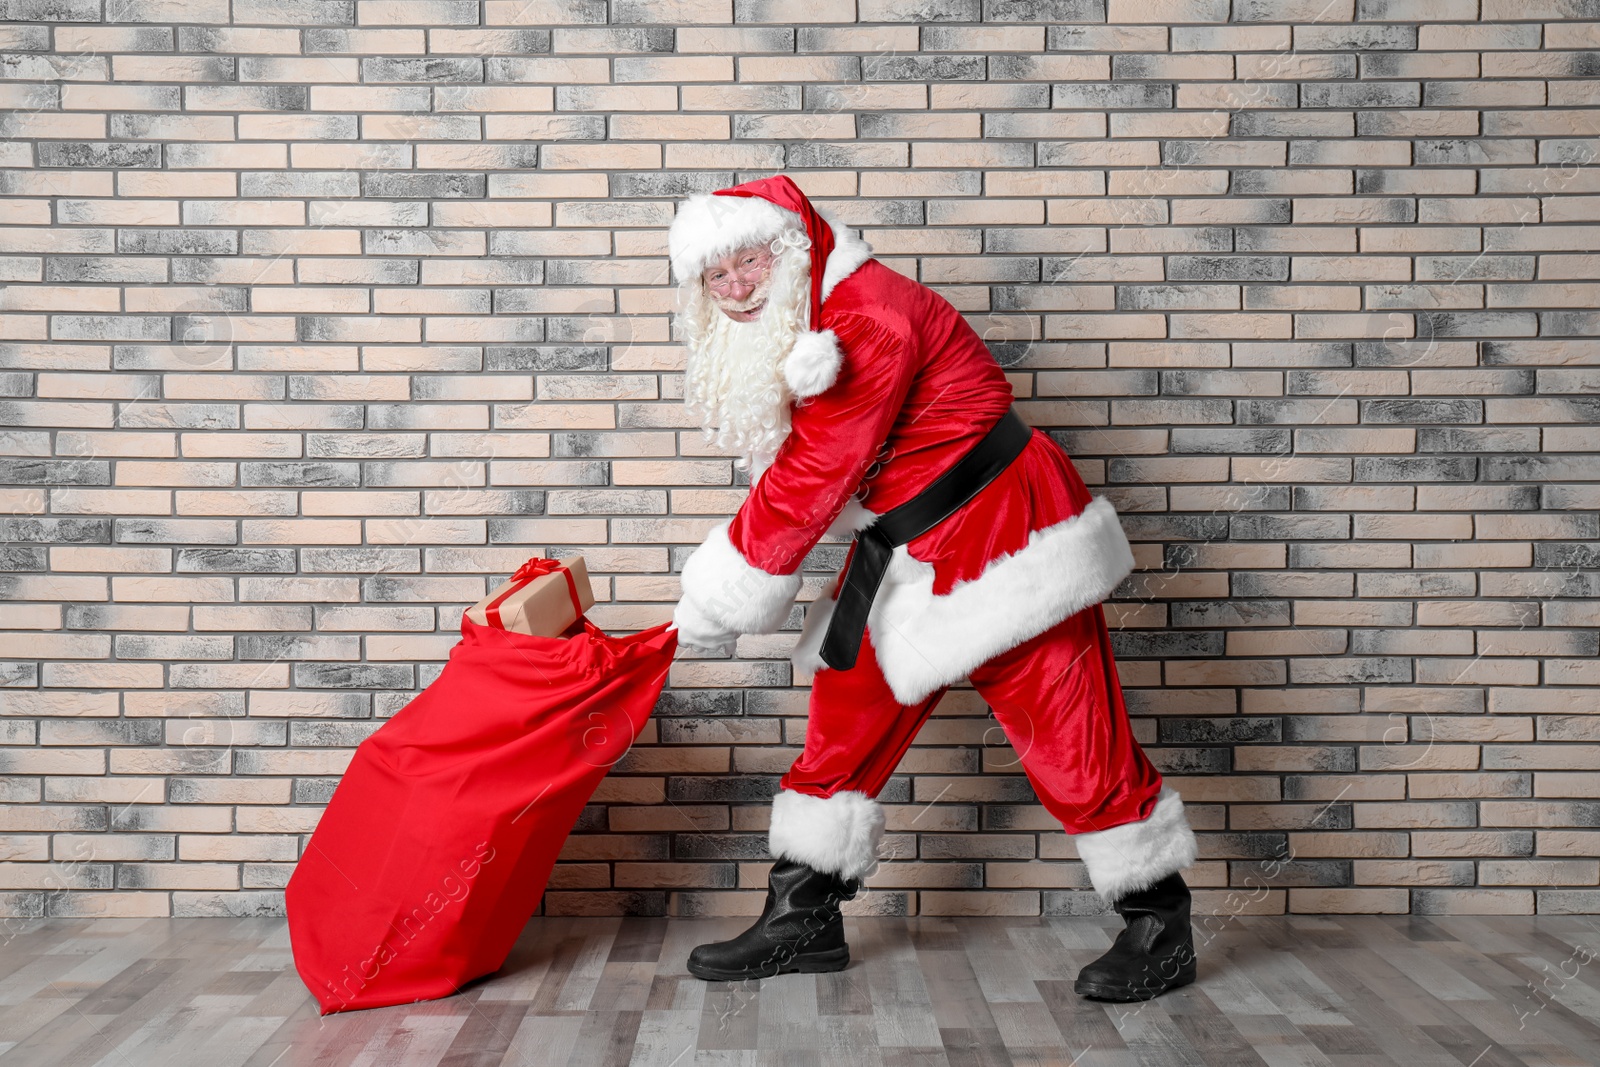 Photo of Authentic Santa Claus with big red bag full of gifts near brick wall